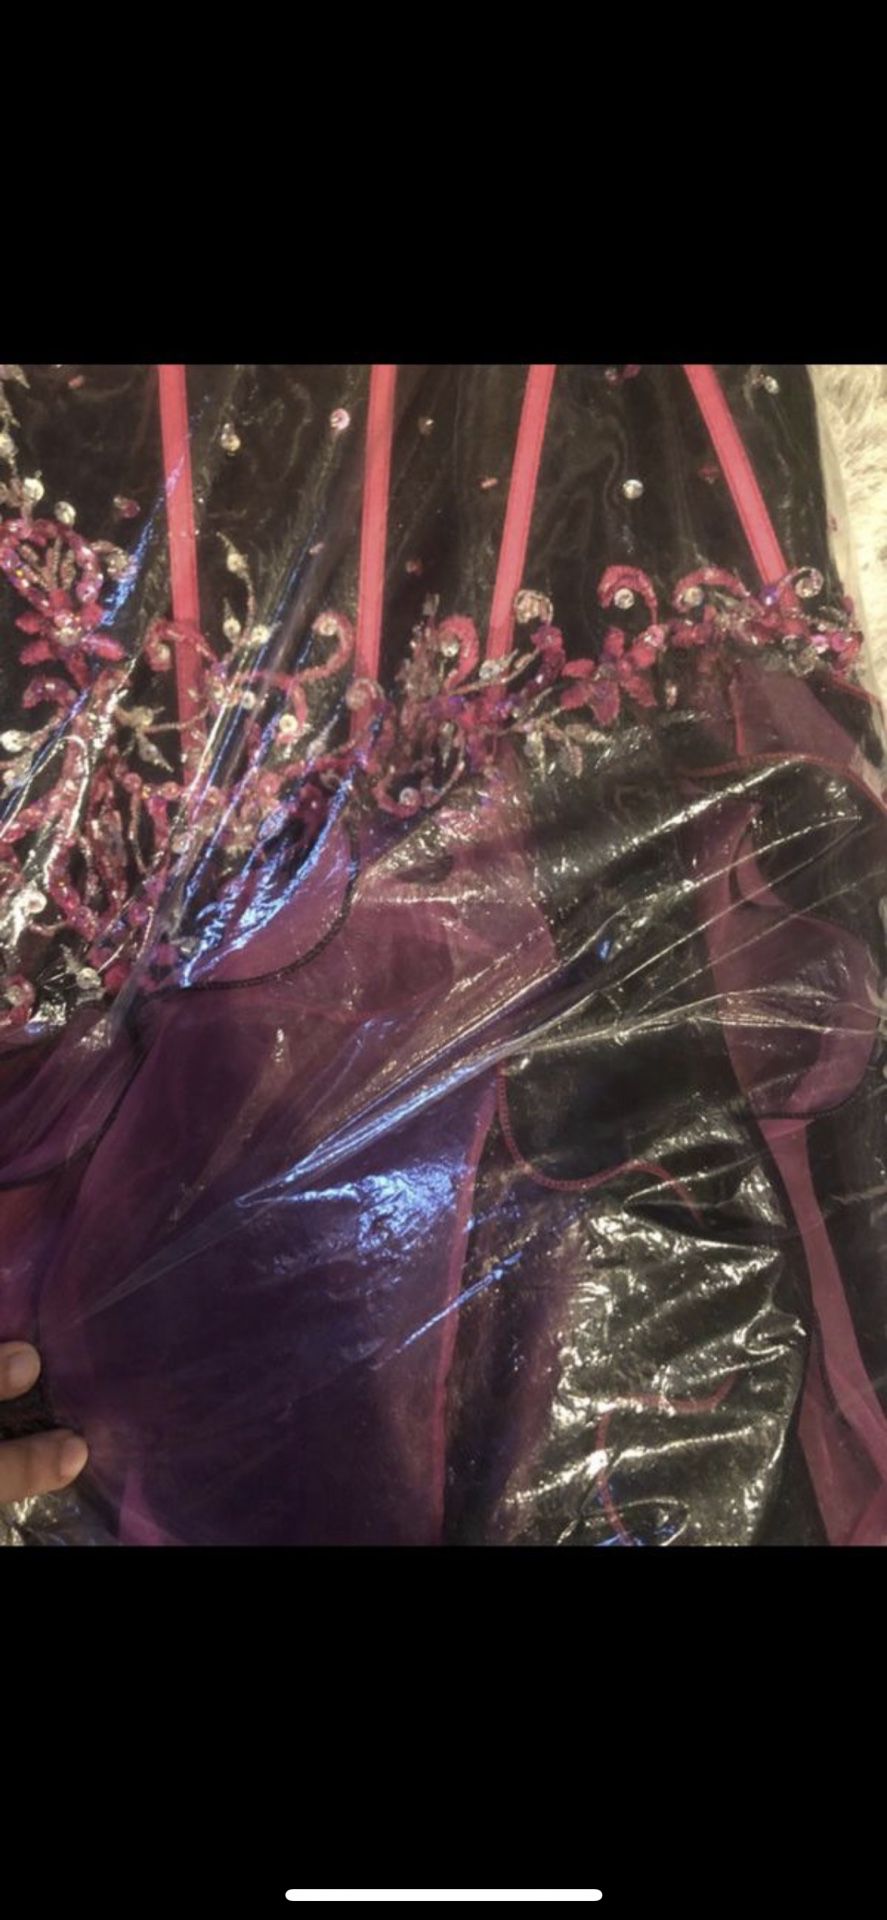 New NEVER worn before ball gown size 10 purple with sequence. Prom dress, ball gown, Halloween, Quinceanera, beautiful gown. Purple/black and pink an